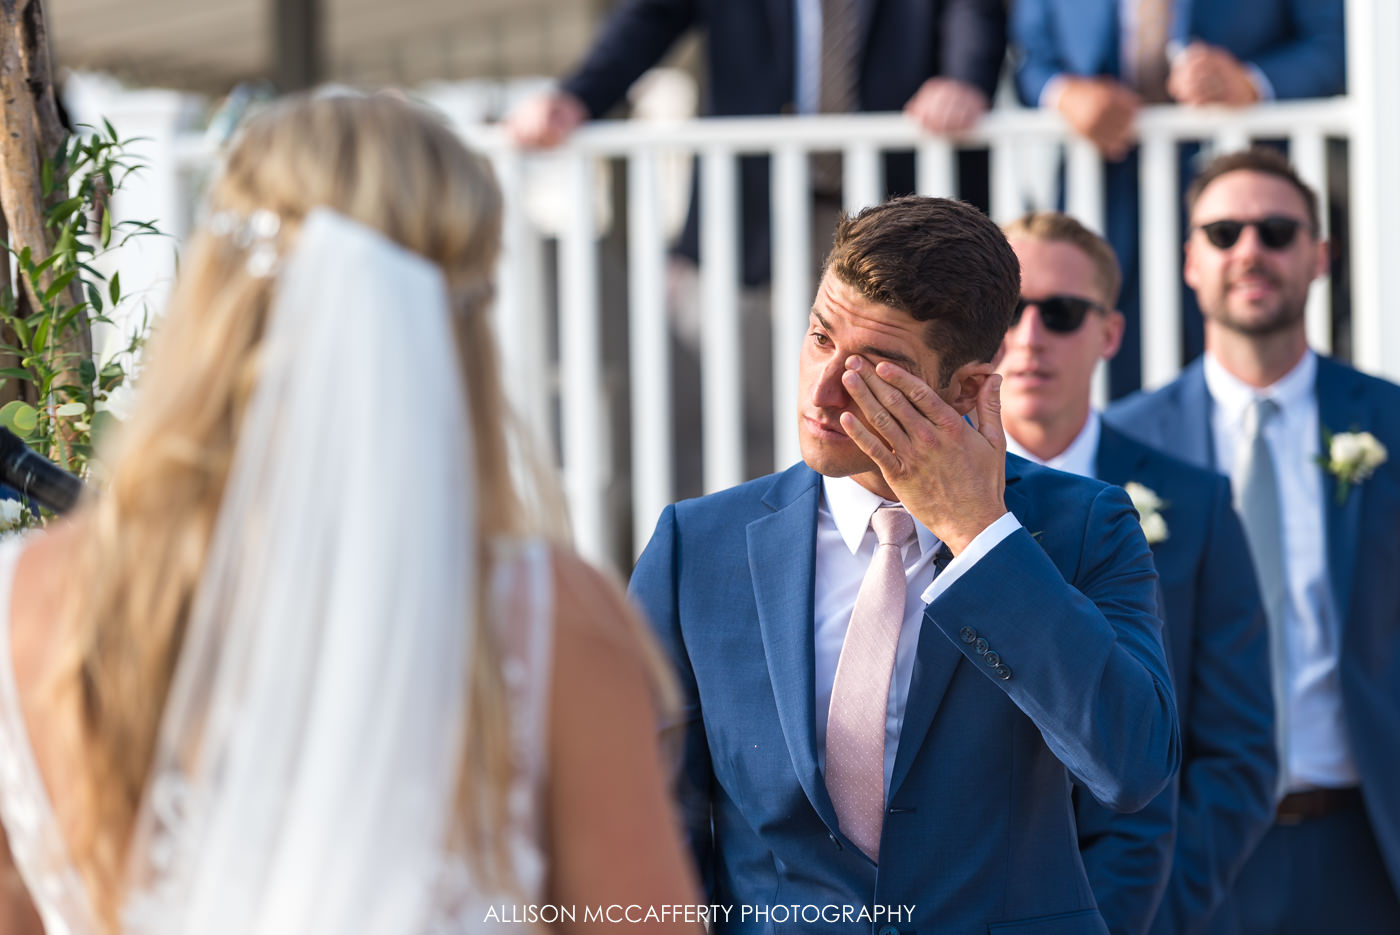 Groom crying during wedding ceremony at Brant Beach Yacht Club